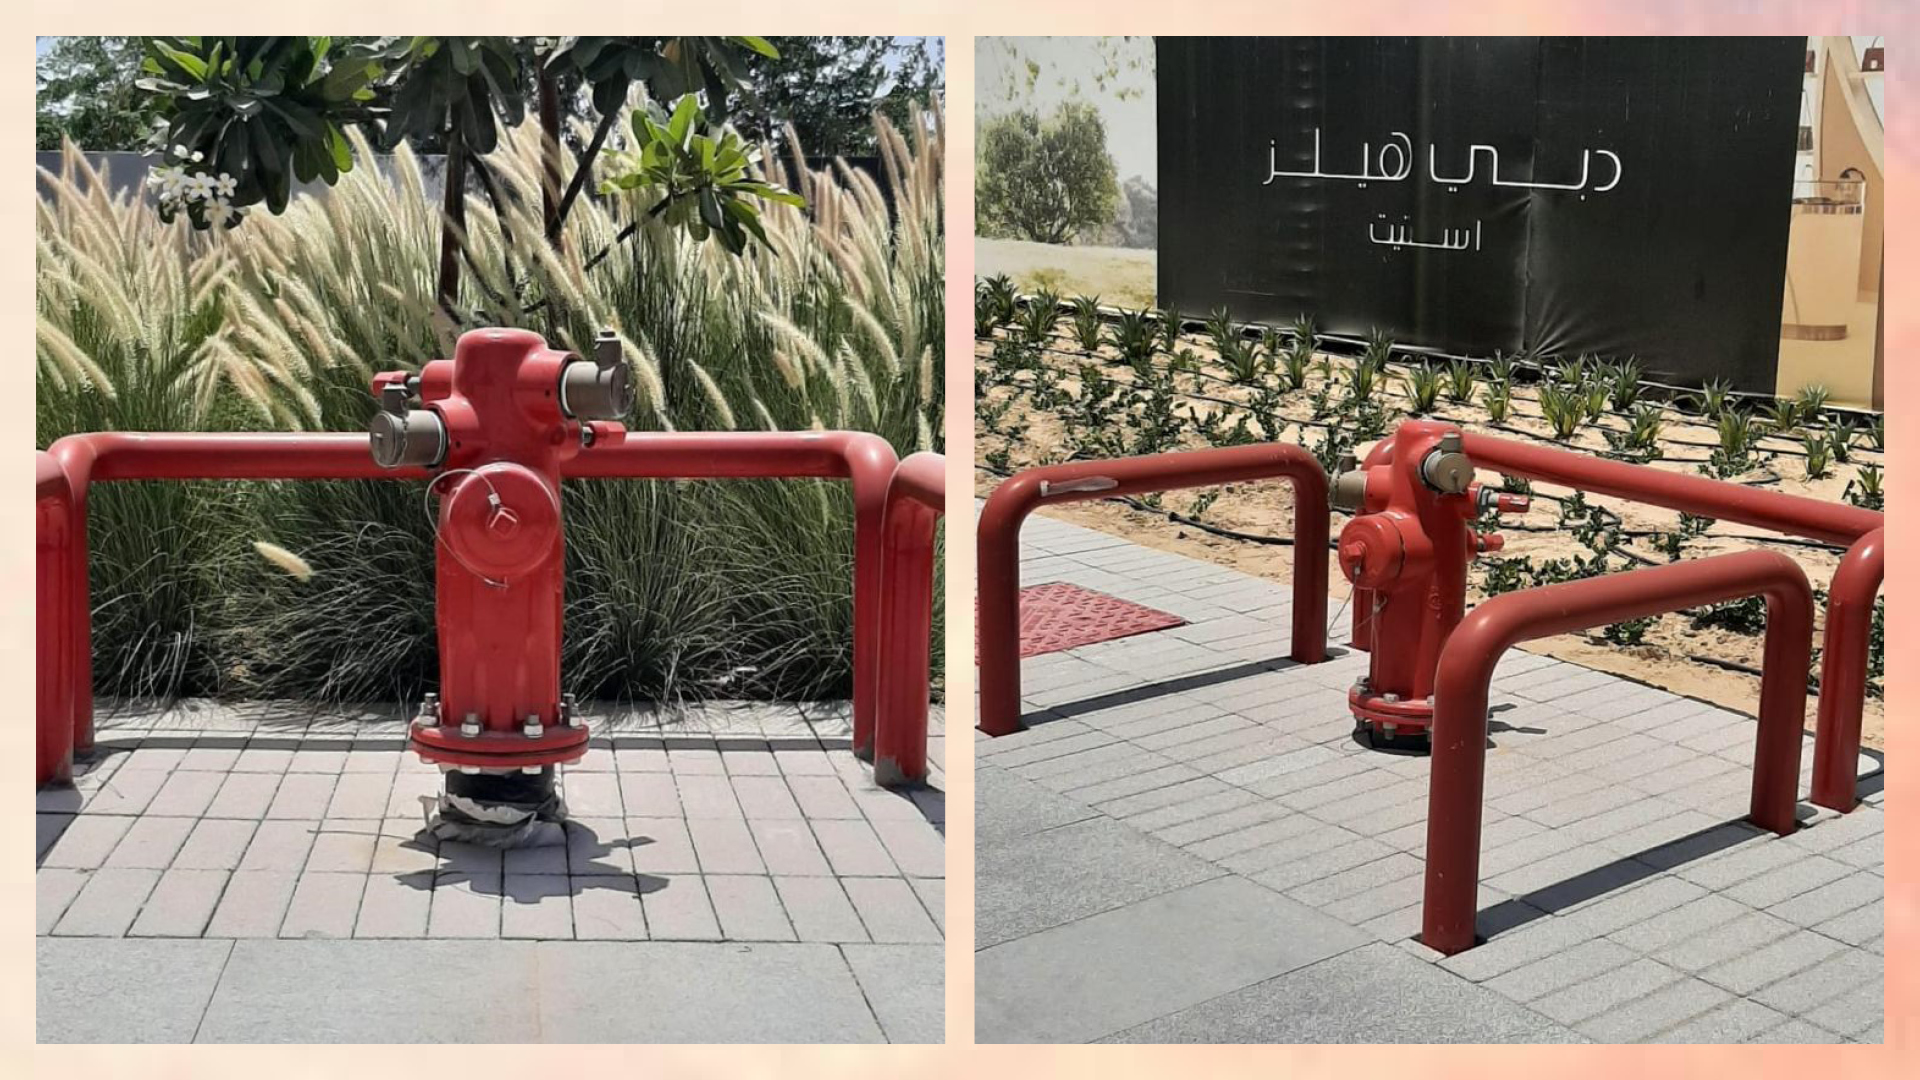 Fire hydrant